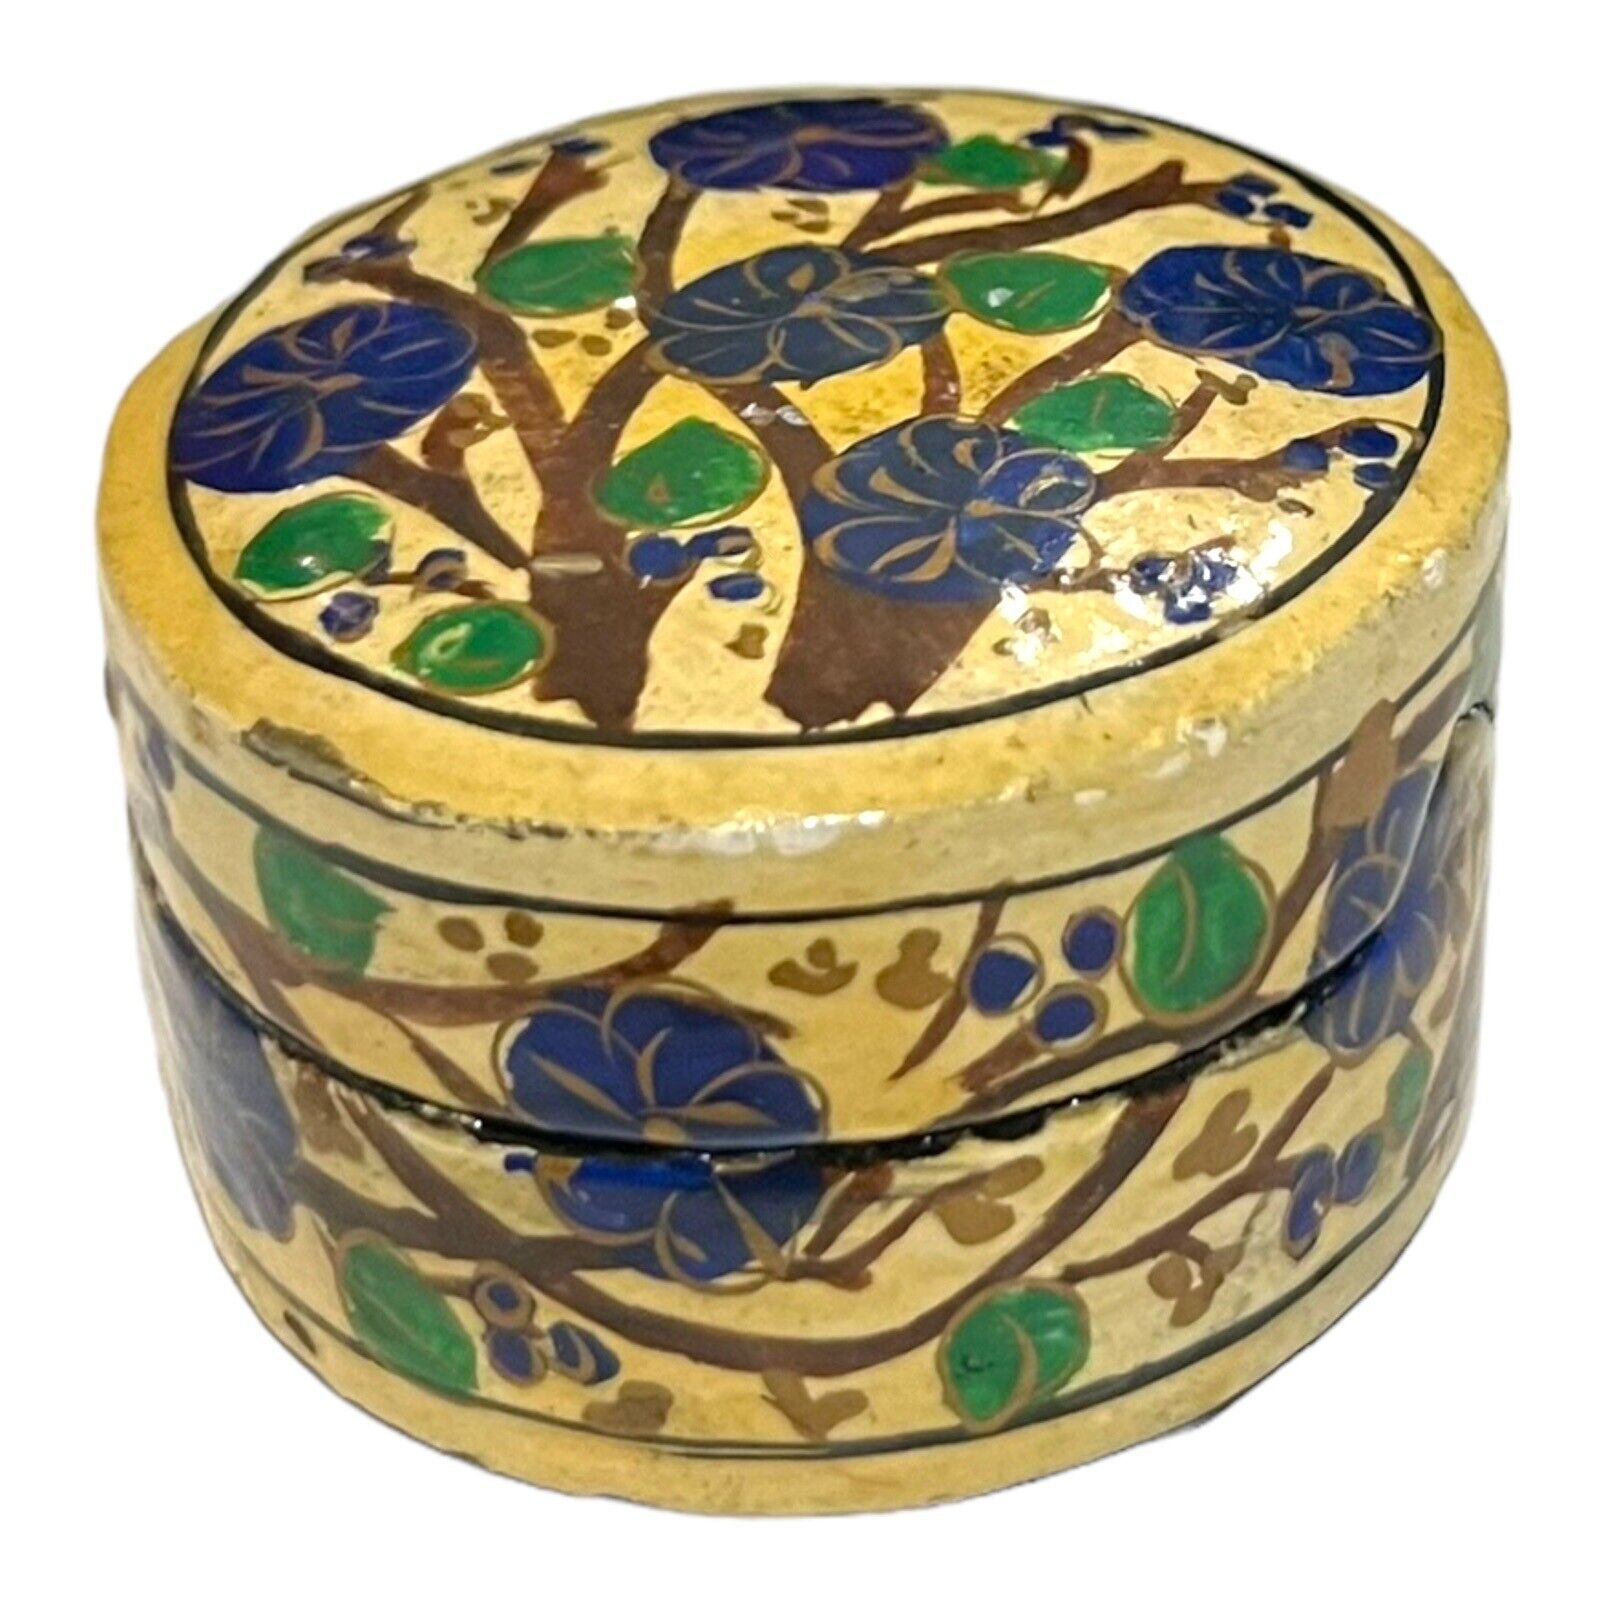 Vintage Paper Mache Round Trinket Jewelry Box Hand Painted Floral Lacquer Finish